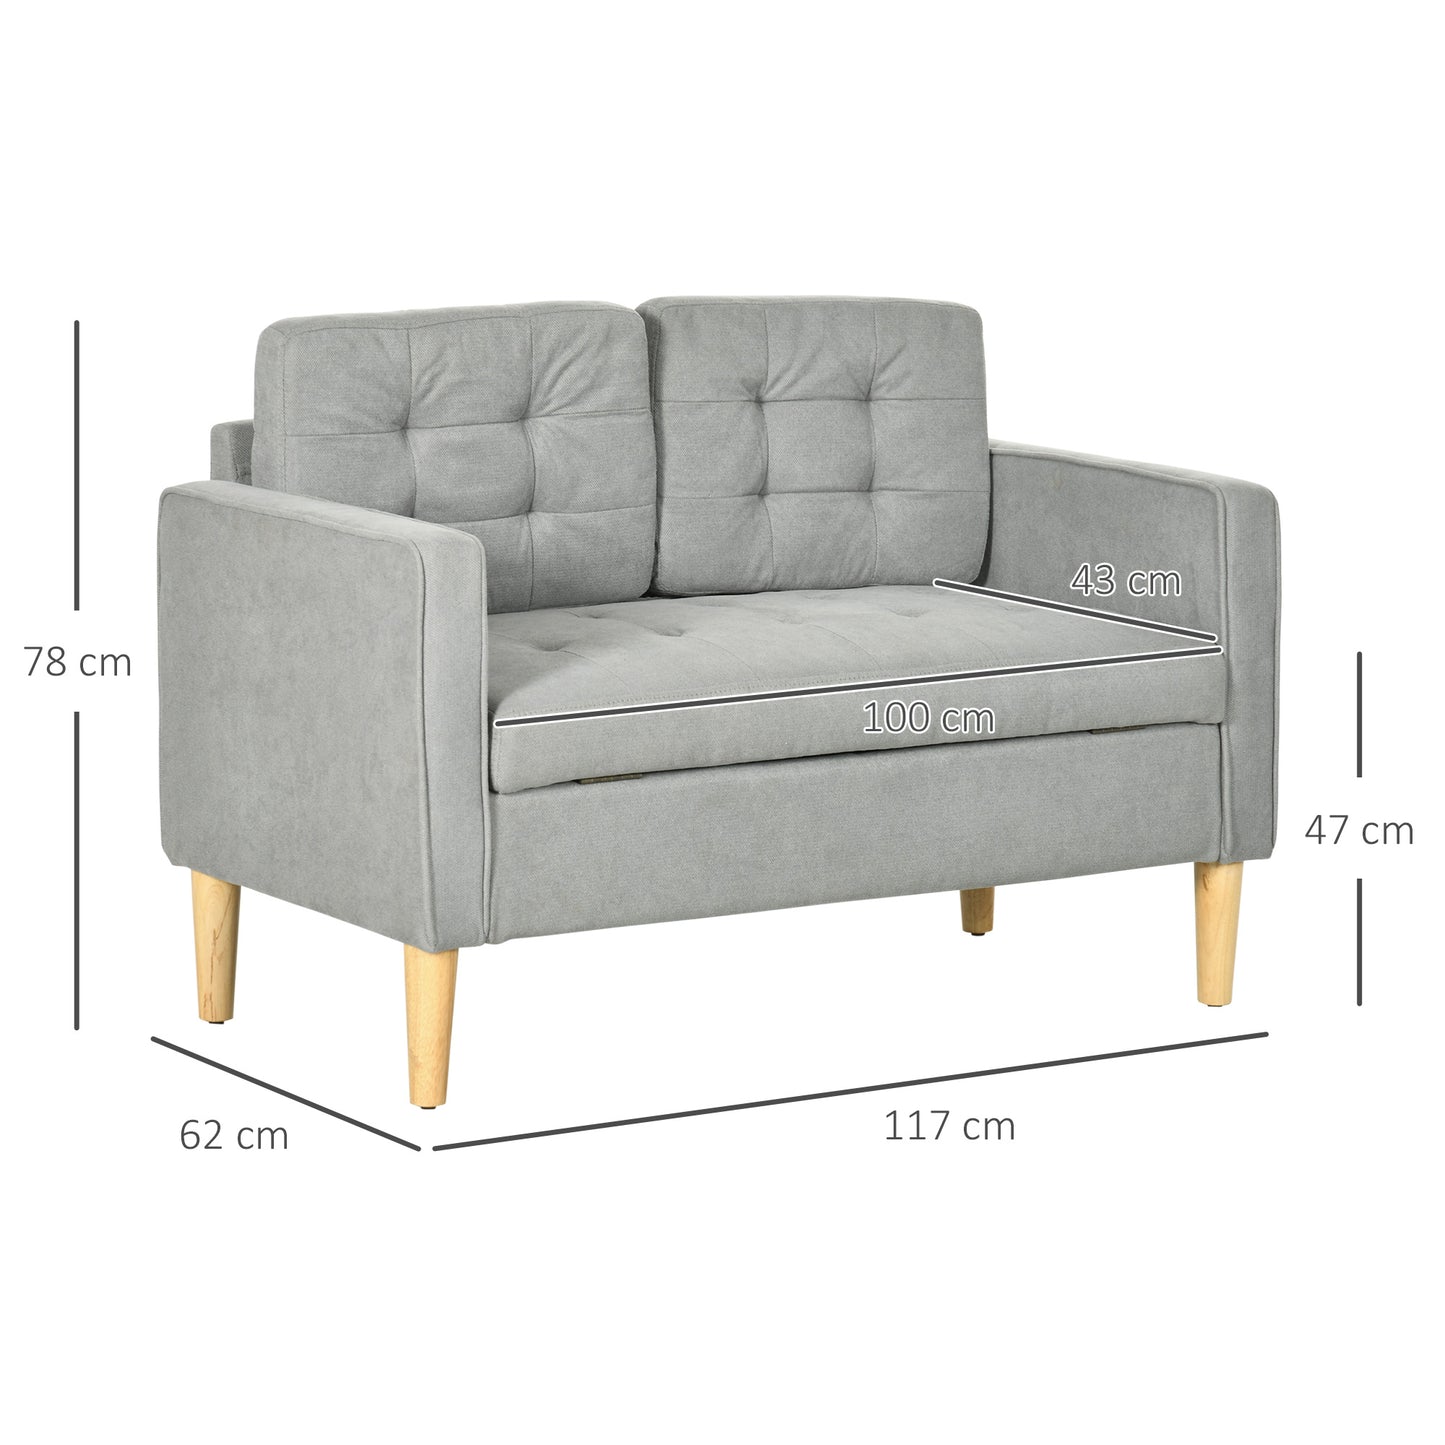 HOMCOM Modern 2 Seater Sofa with Hidden Storage, 117cm Tufted Cotton Couch, Compact Loveseat Sofa with Wood Legs, Light Grey